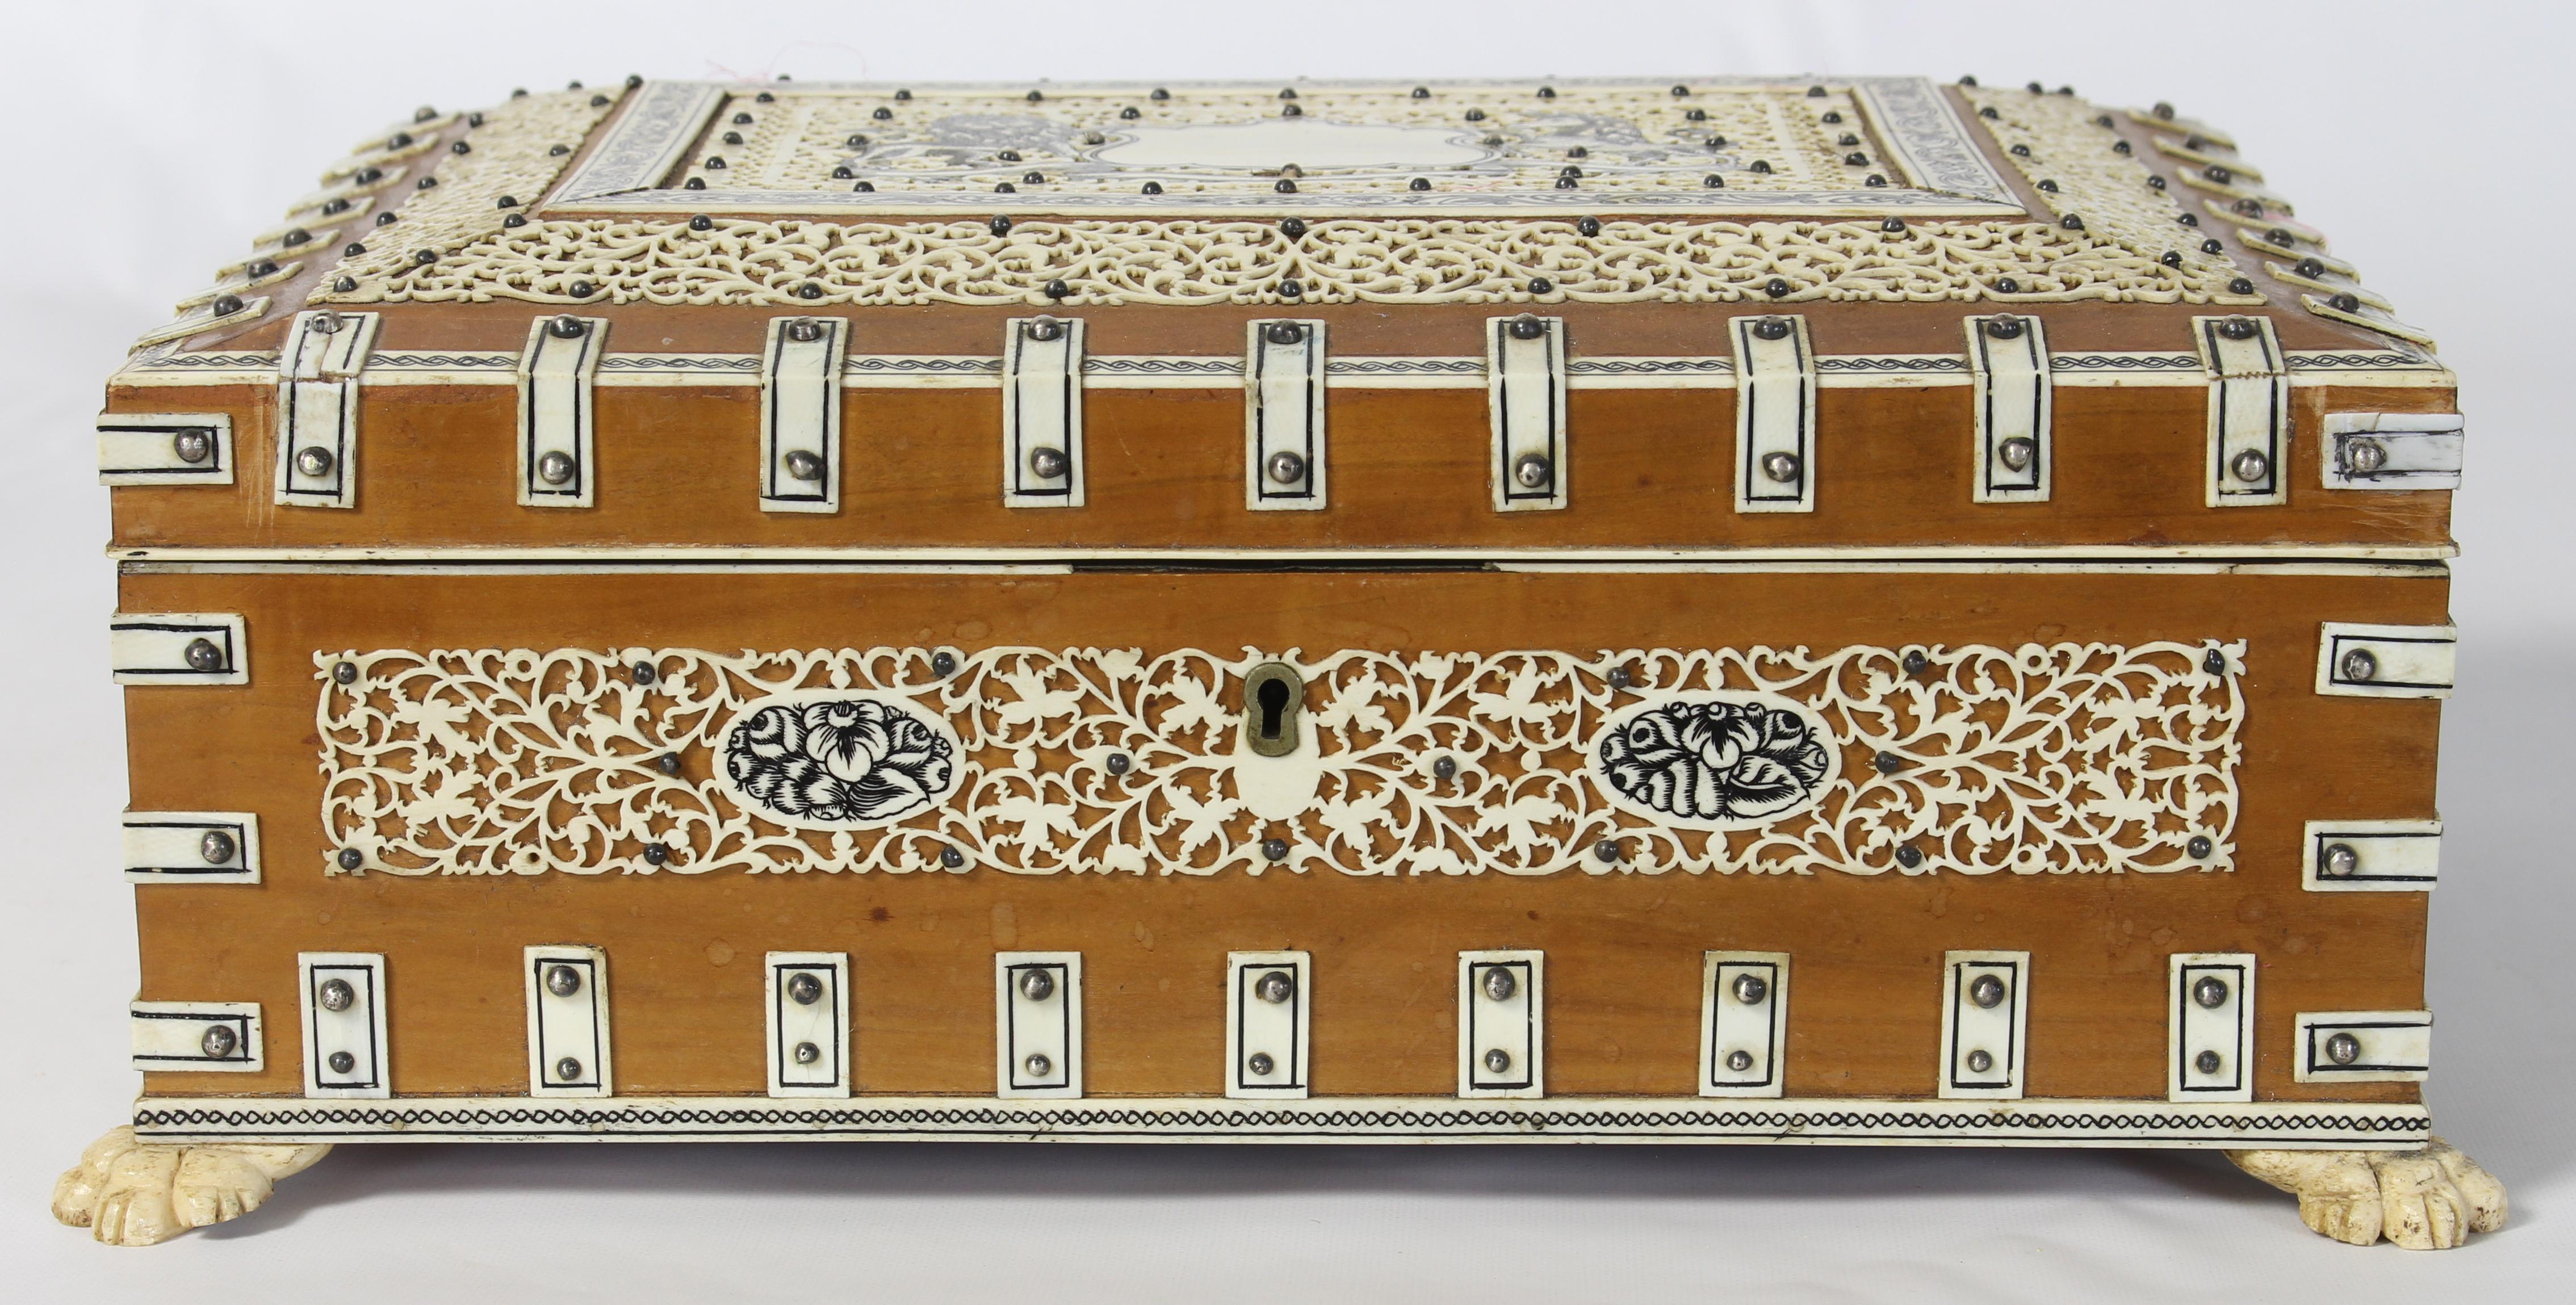 A late 19th century Anglo-Indian footed box made of sandlewood and bone engraved with the English Lion and Unicorn flanking an un-engraved cartouche.